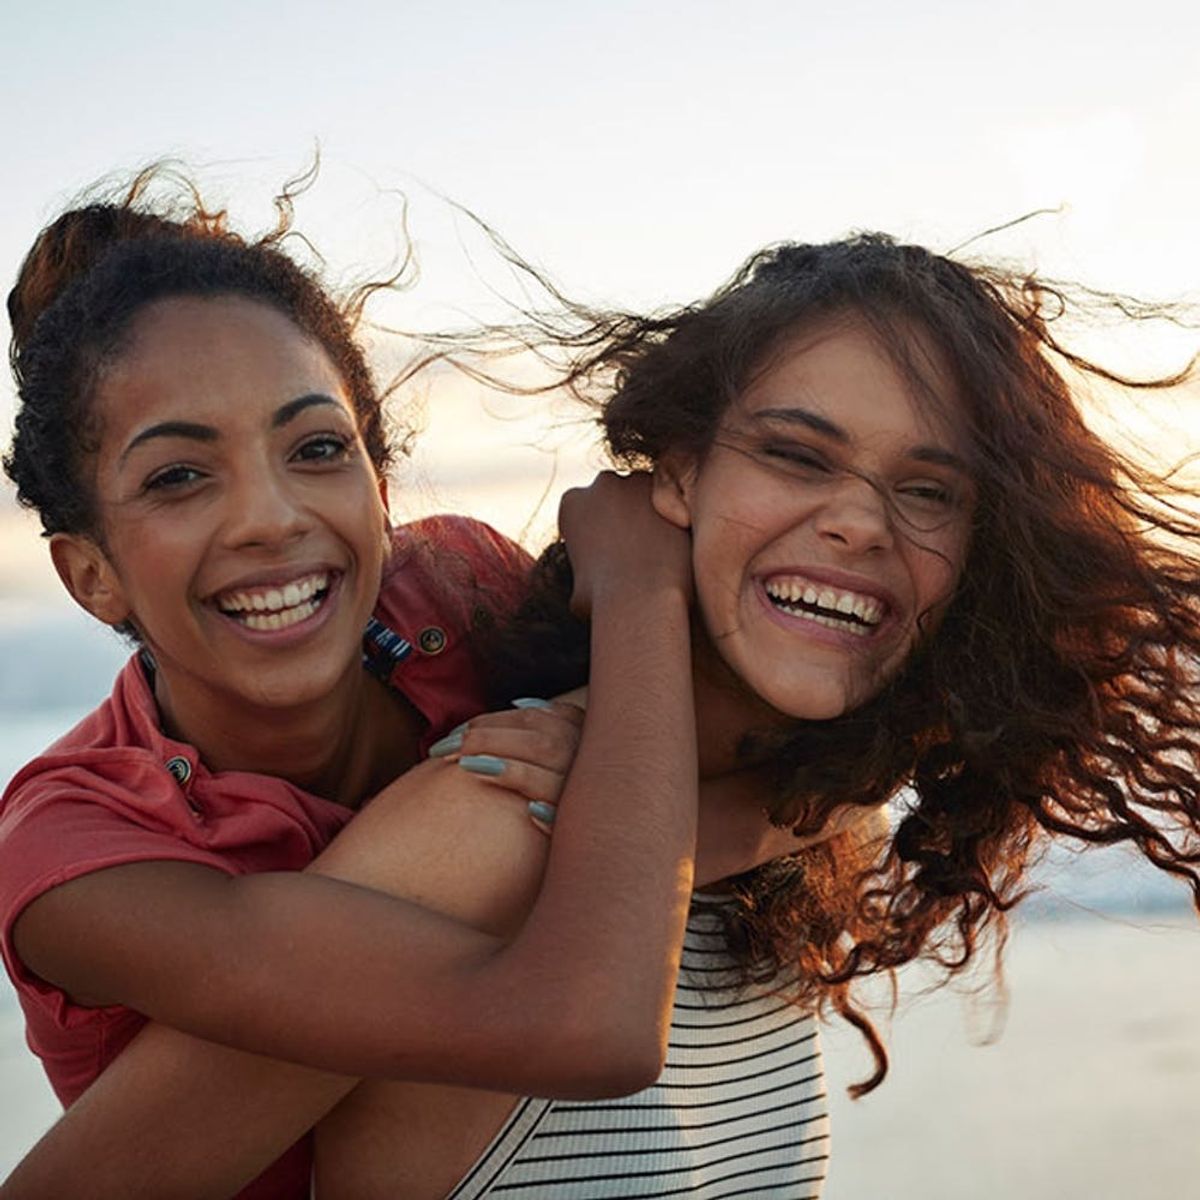 8 Unexpected Ways to Let Your BFF Know You Love Her